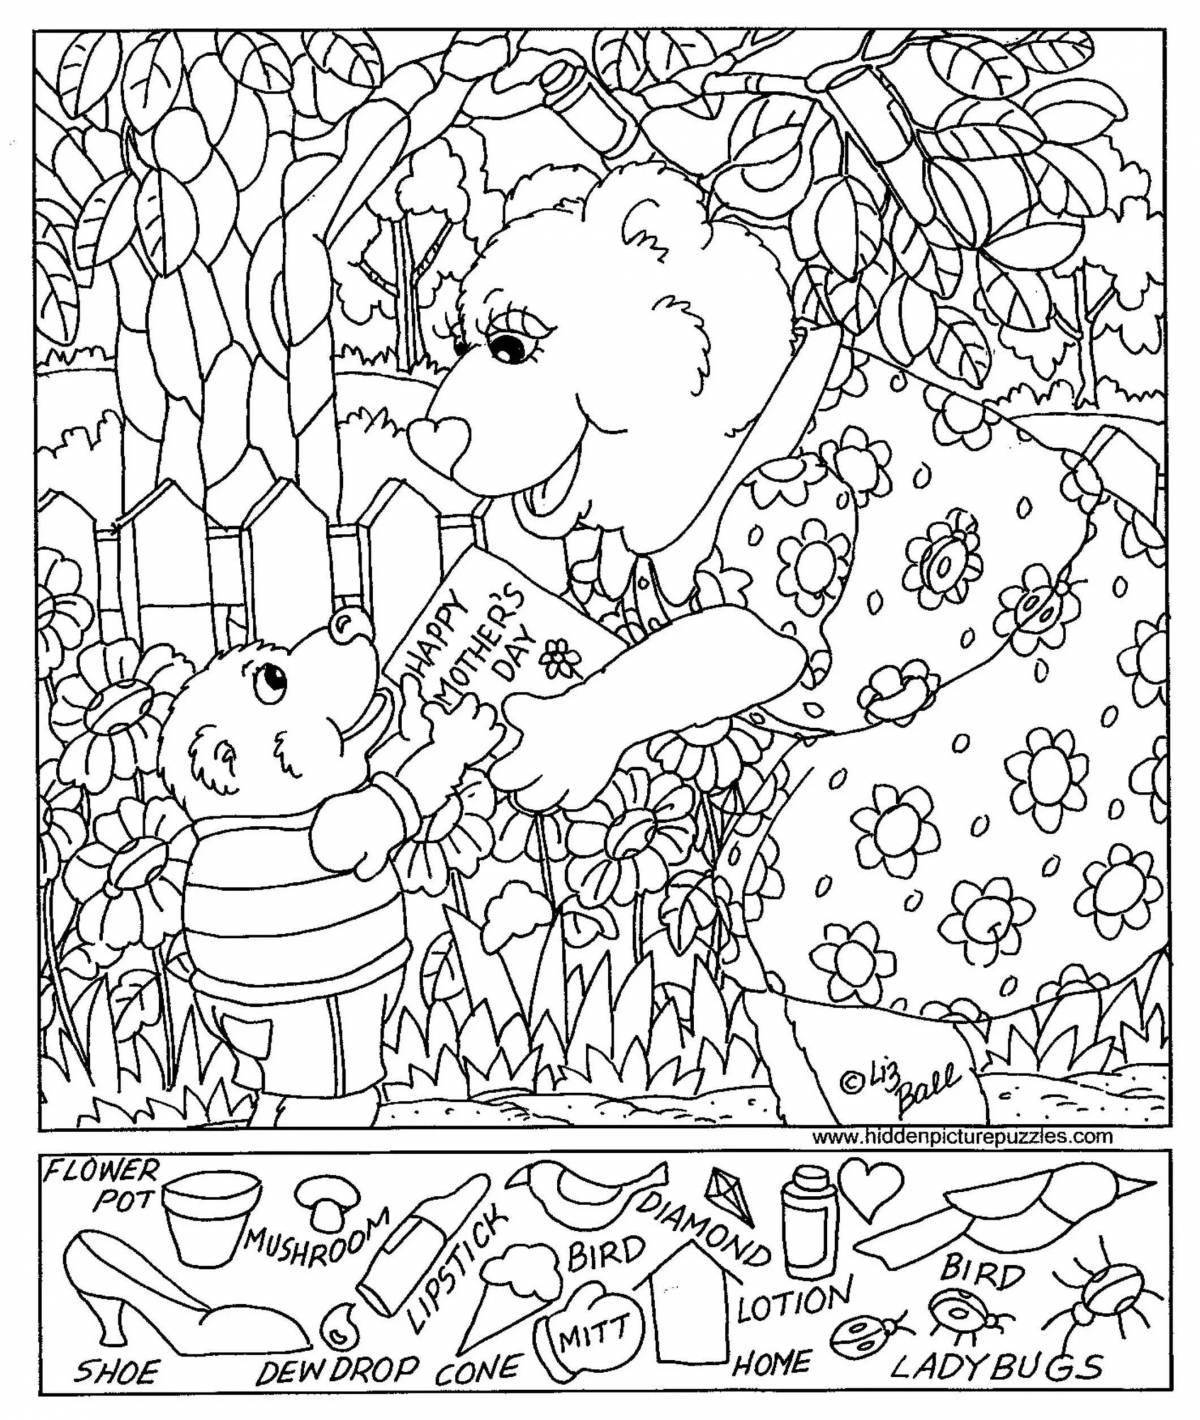 Refreshing coloring for mindfulness